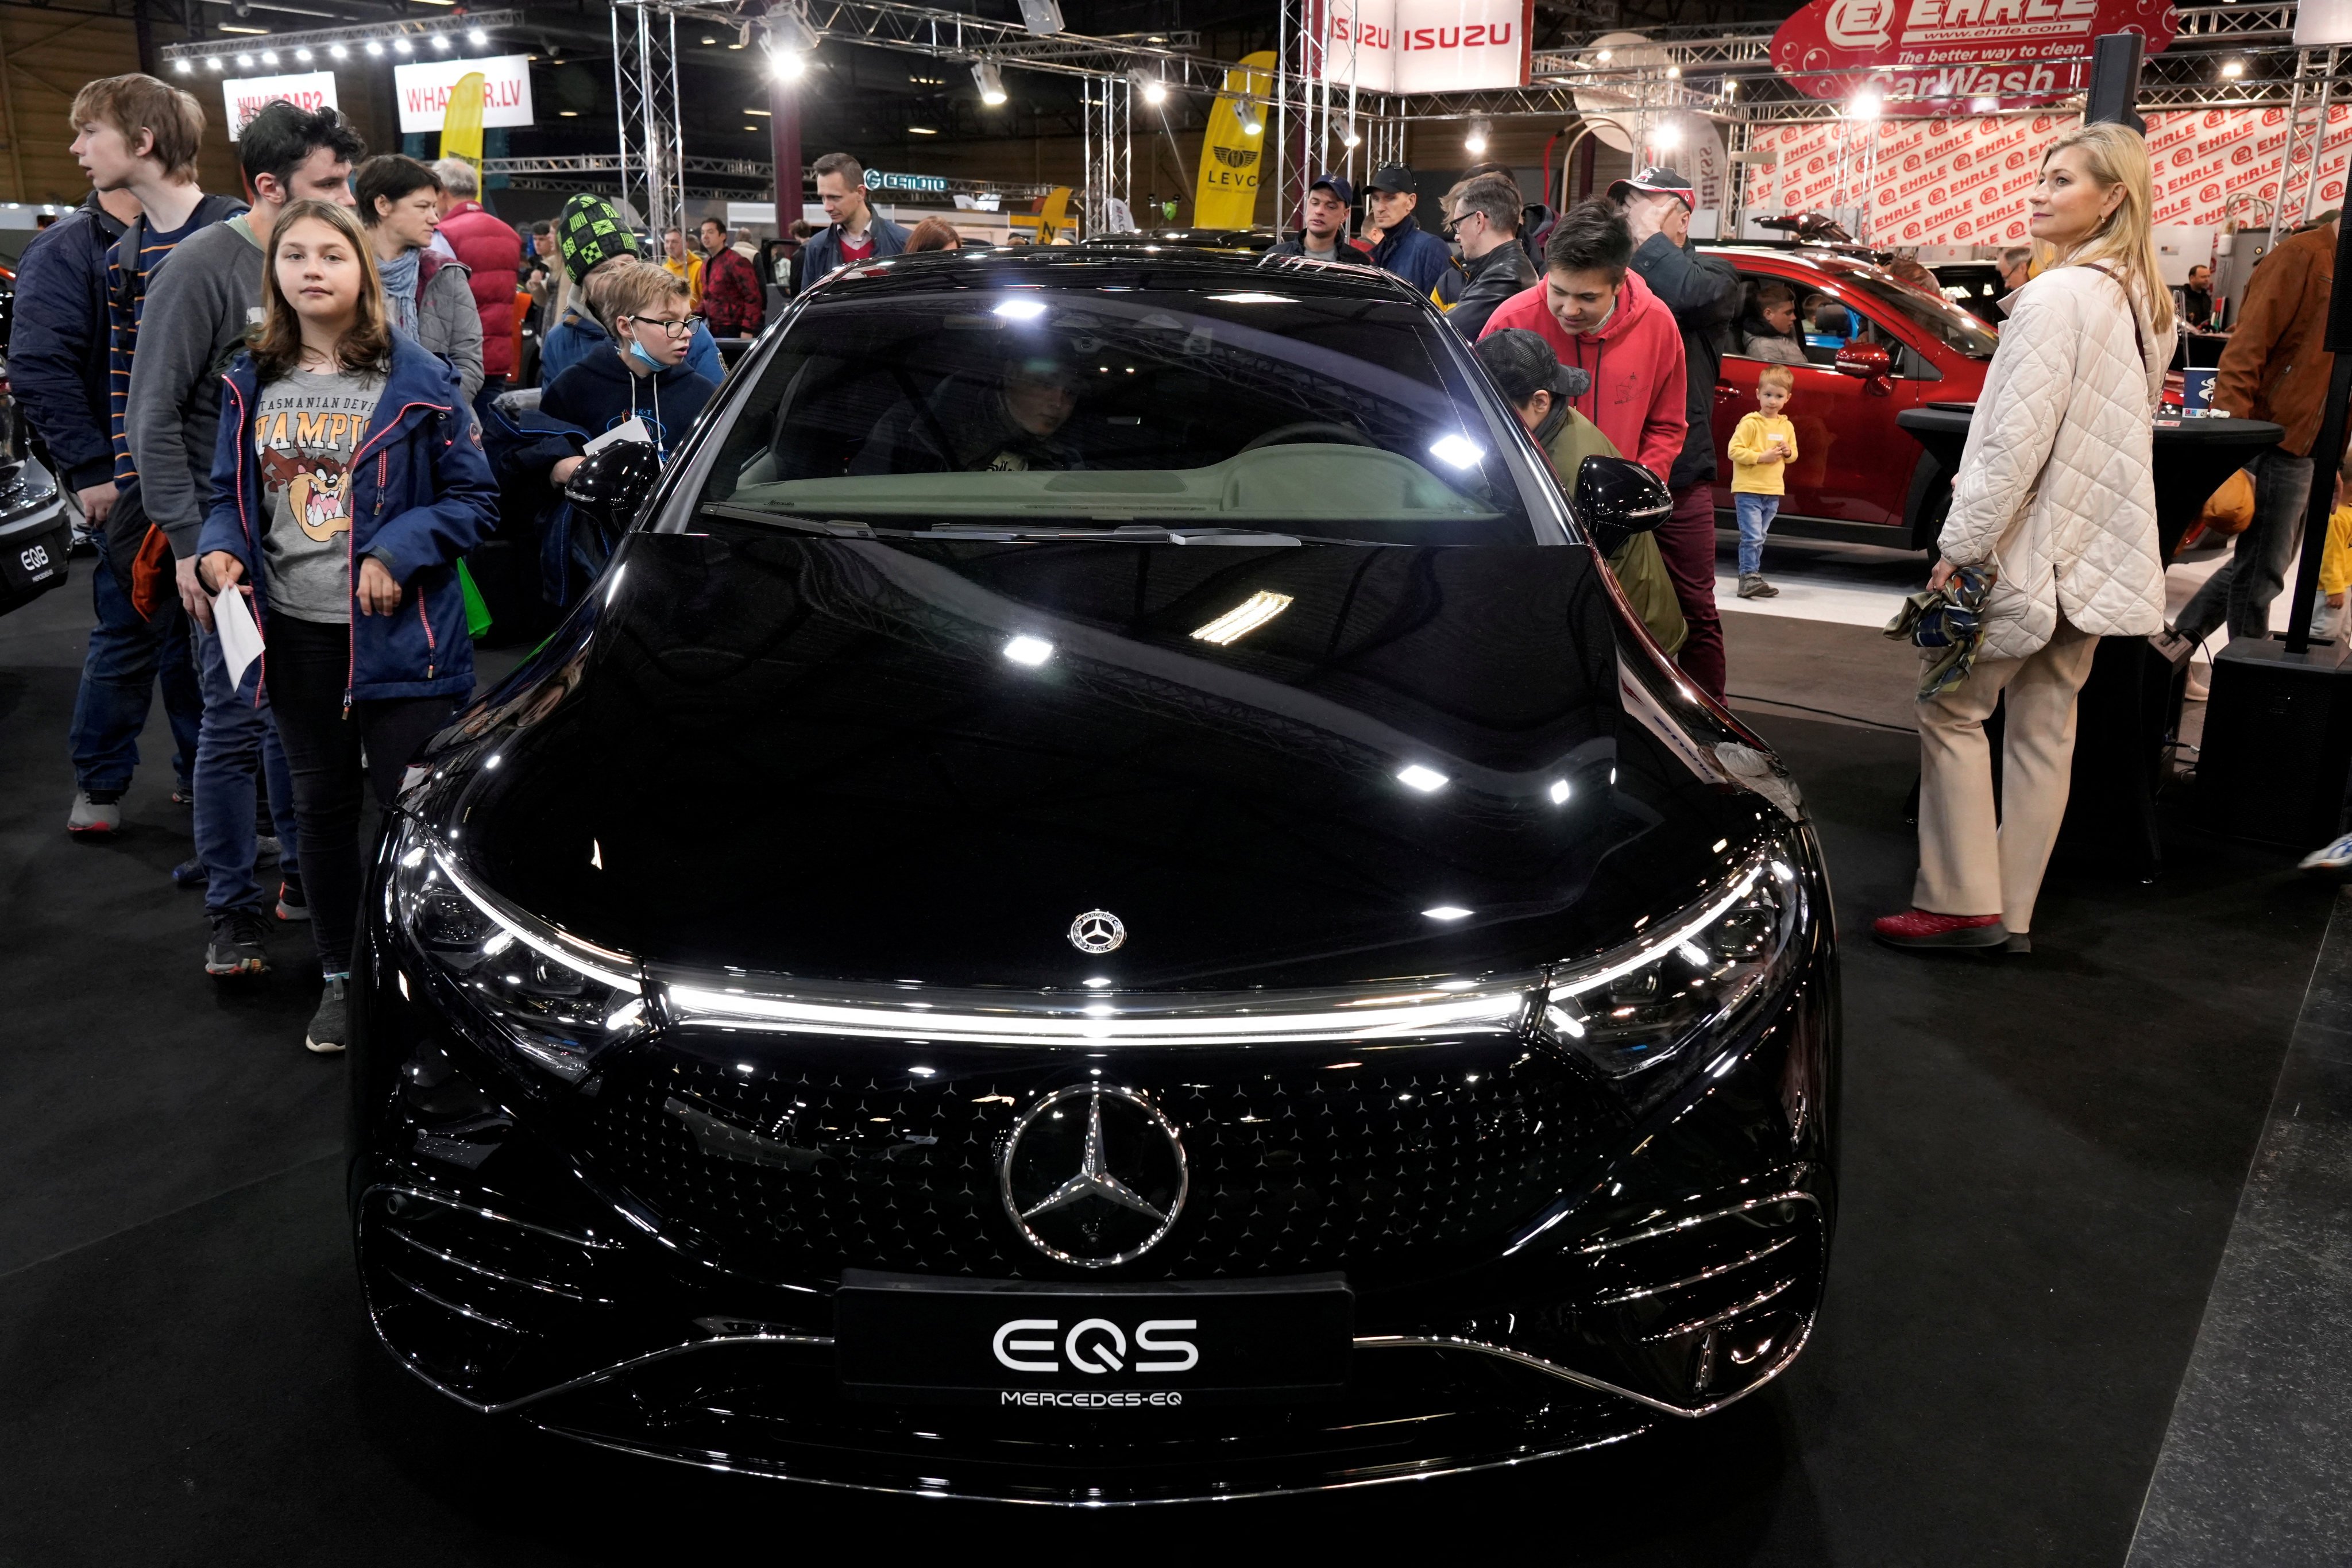 Mercedes cut the price of its EQS electric car in Shanghai amid slow uptake. Photo: Reuters